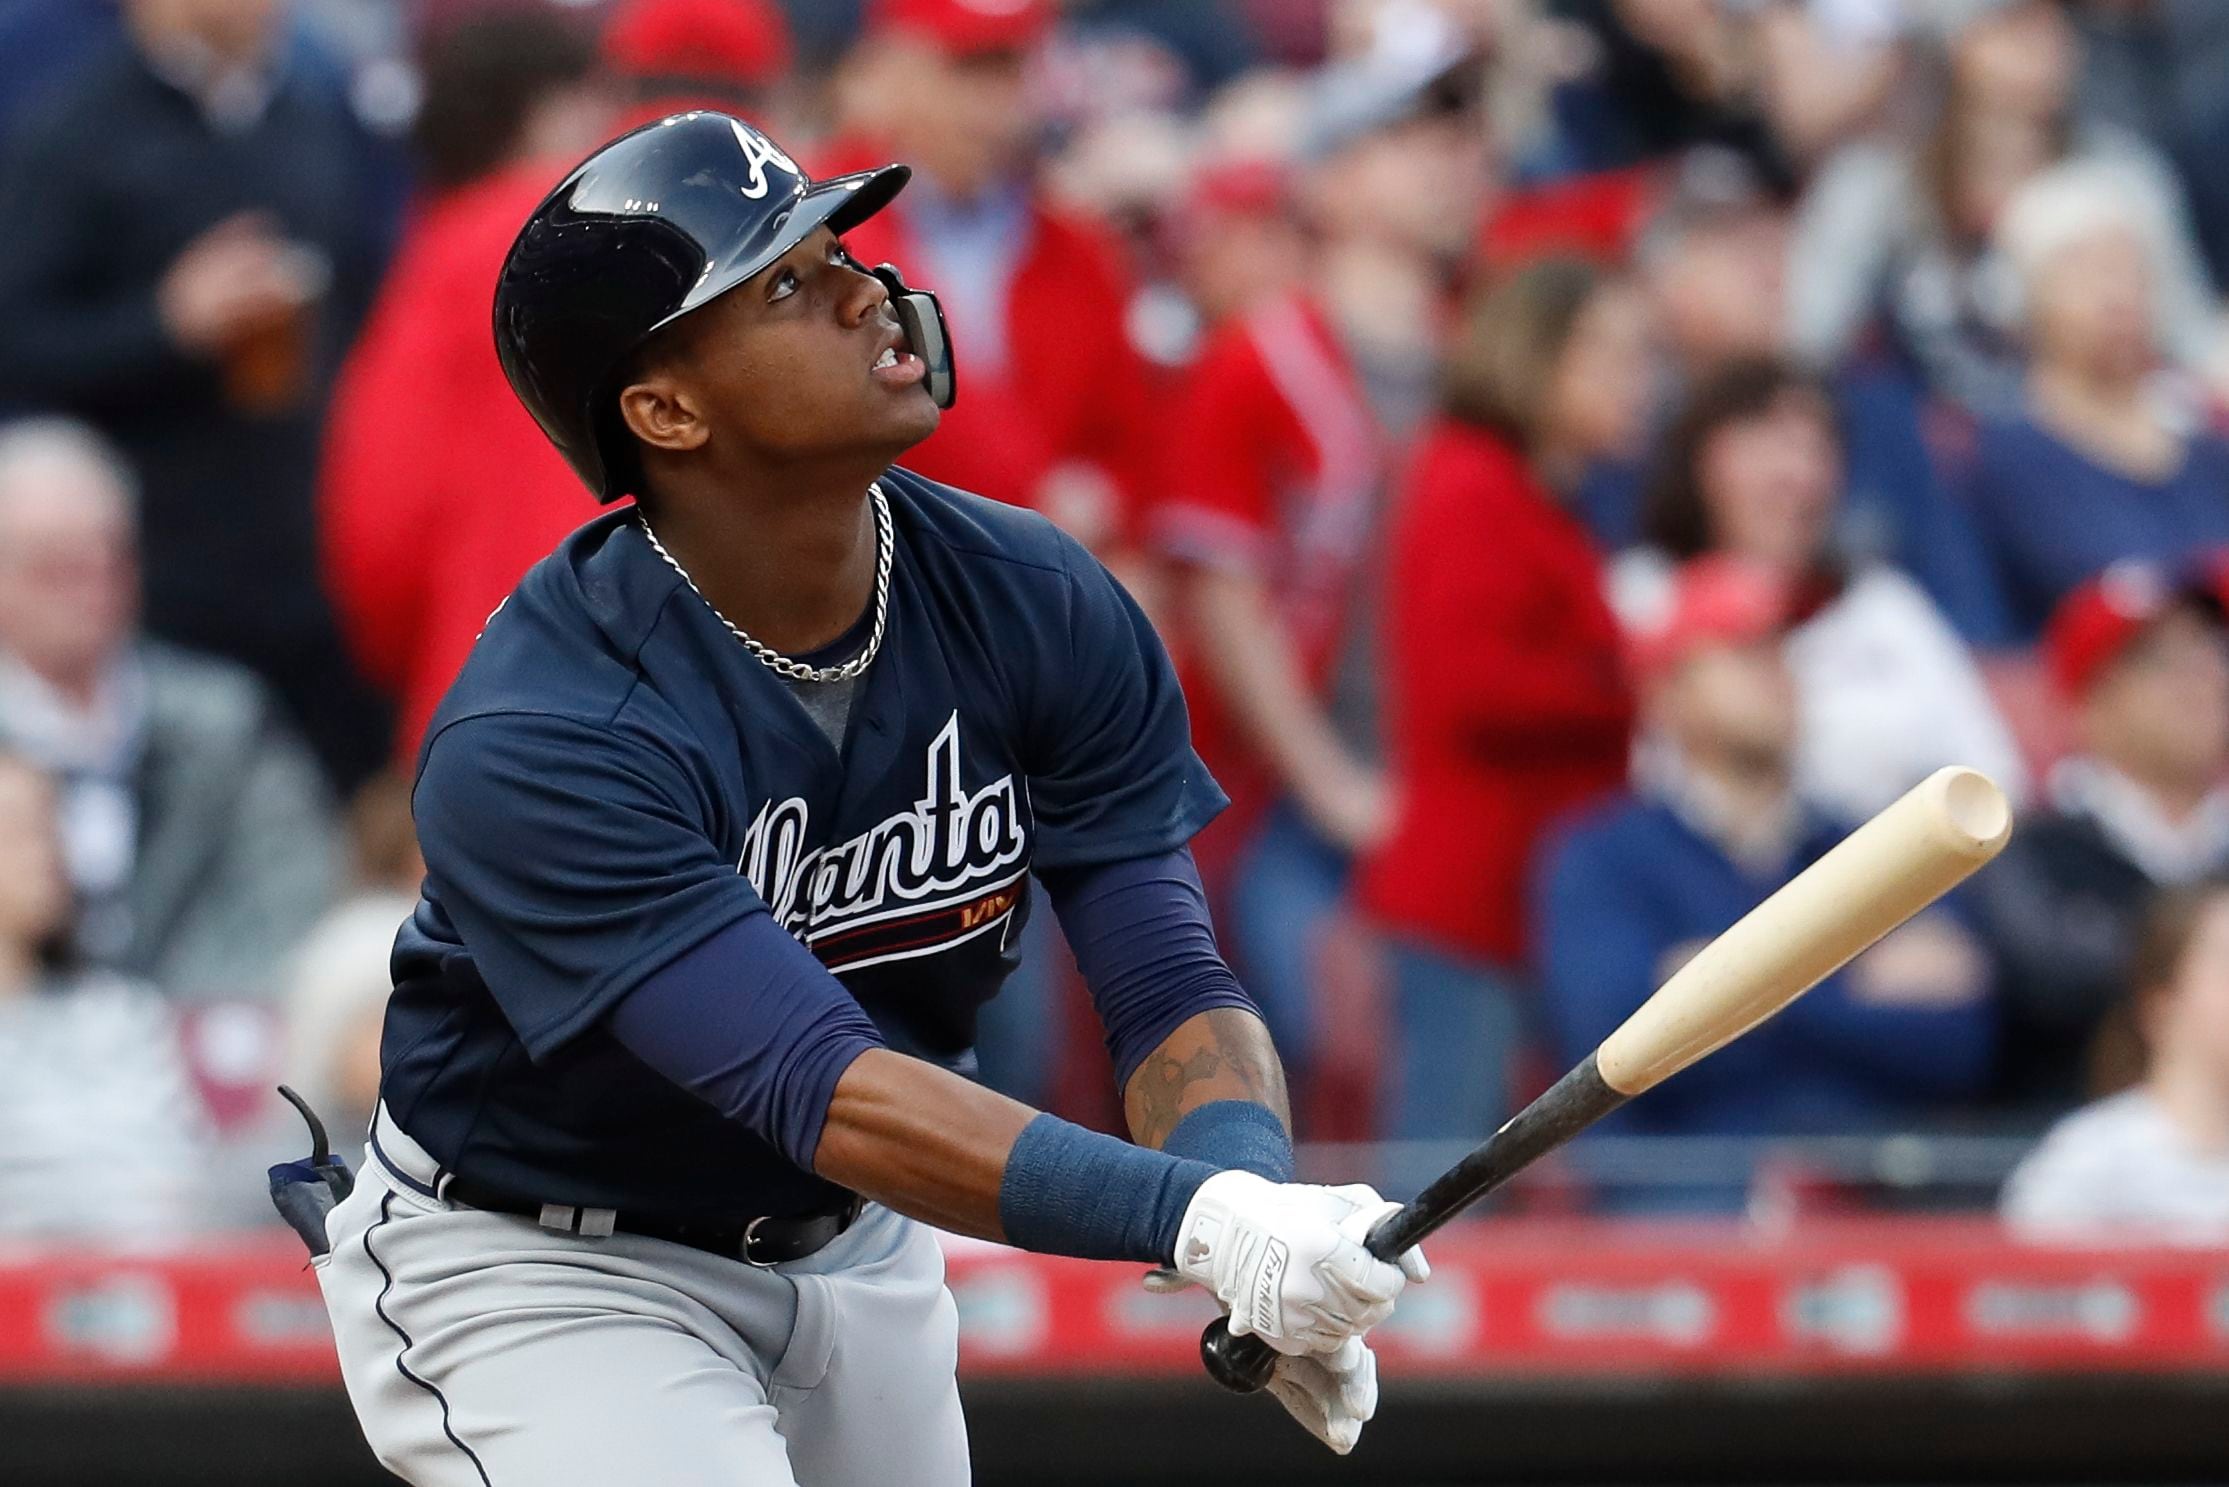 Ronald Acuña Jr. is the FIRST EVER player in history to hit 30